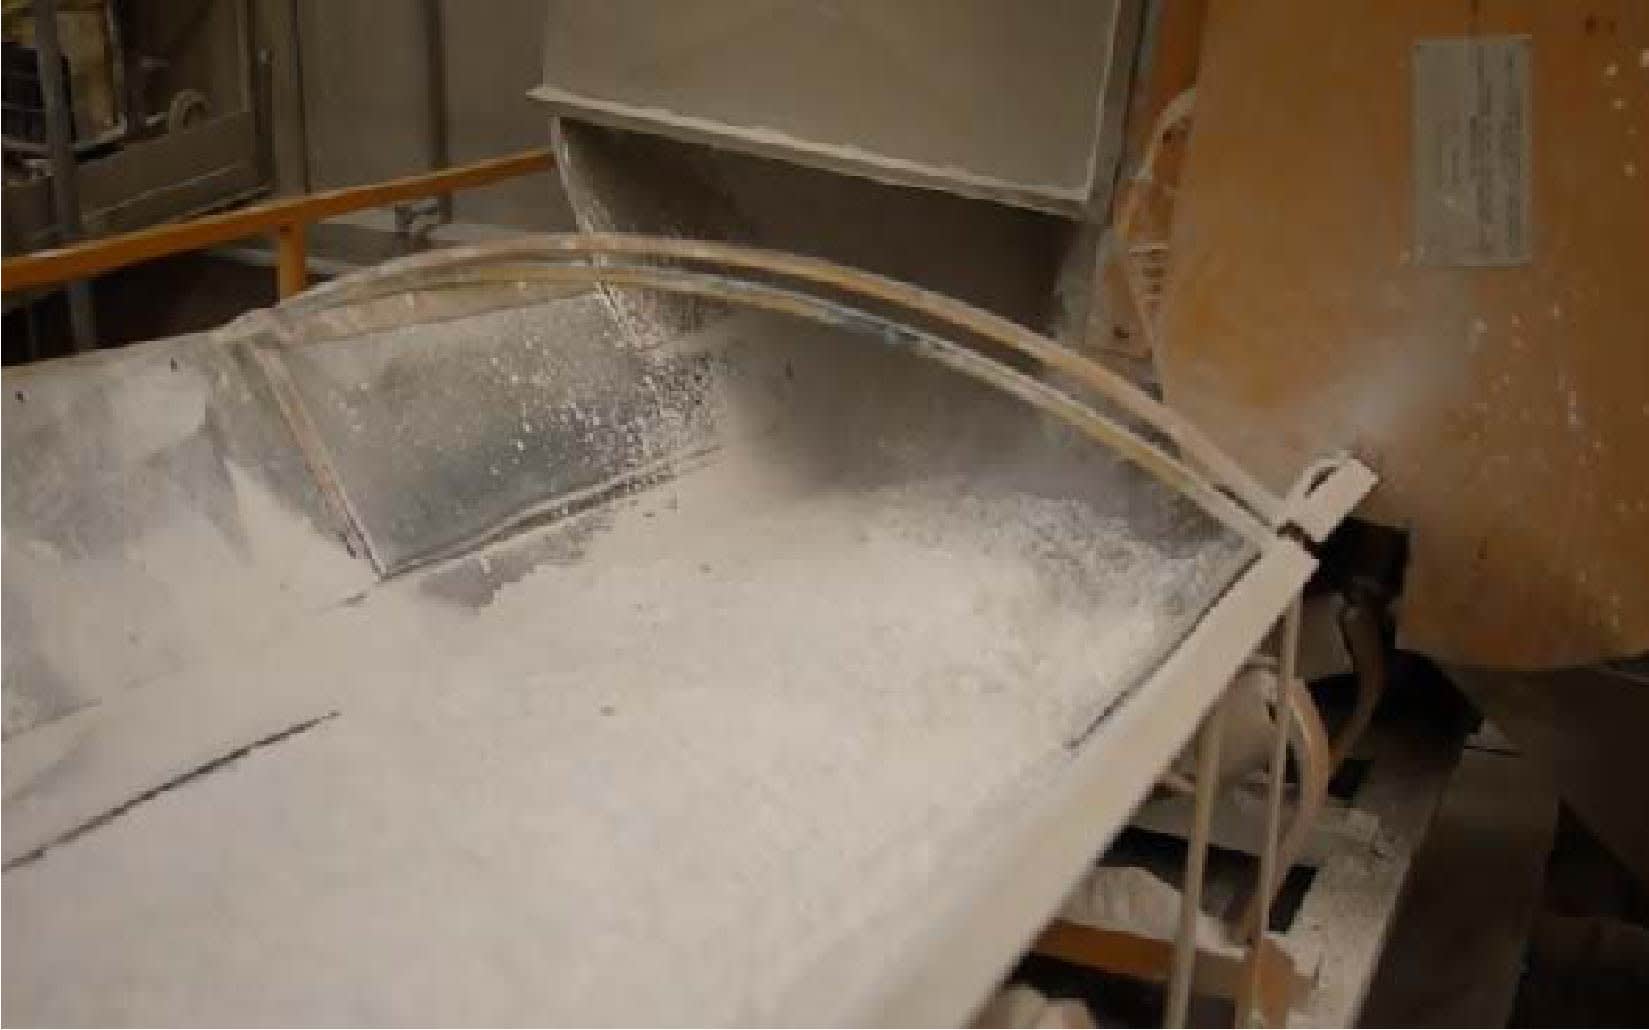 Mixing marble powder, resin and the larger stones to make a marble slurry that is then cast and cut into Marmoreal.